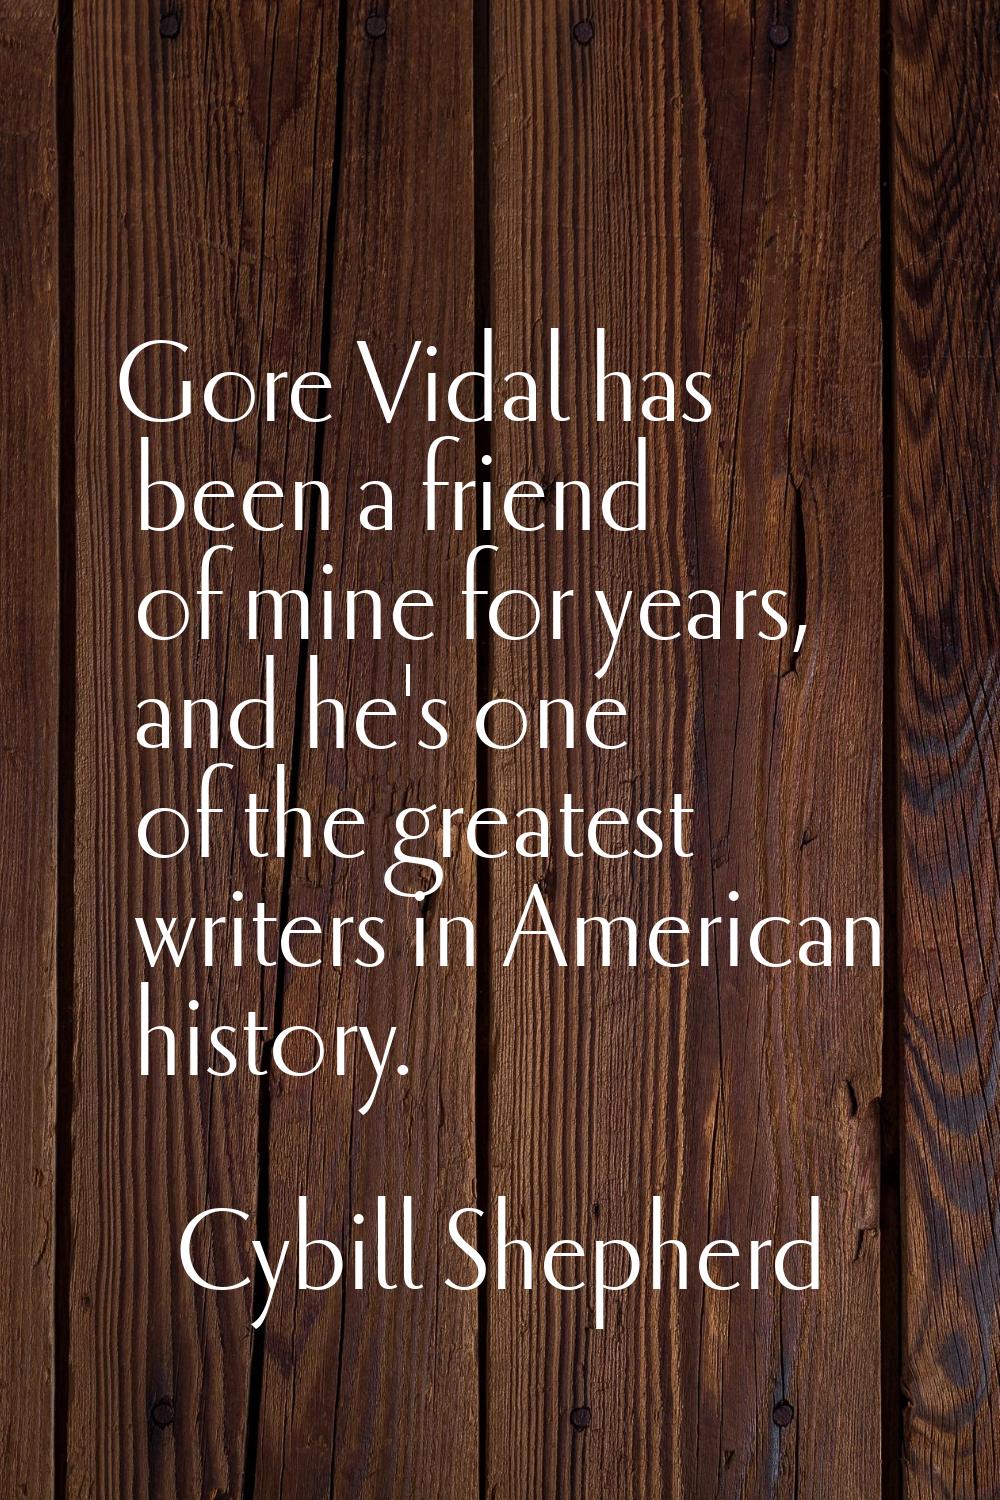 Gore Vidal has been a friend of mine for years, and he's one of the greatest writers in American hi